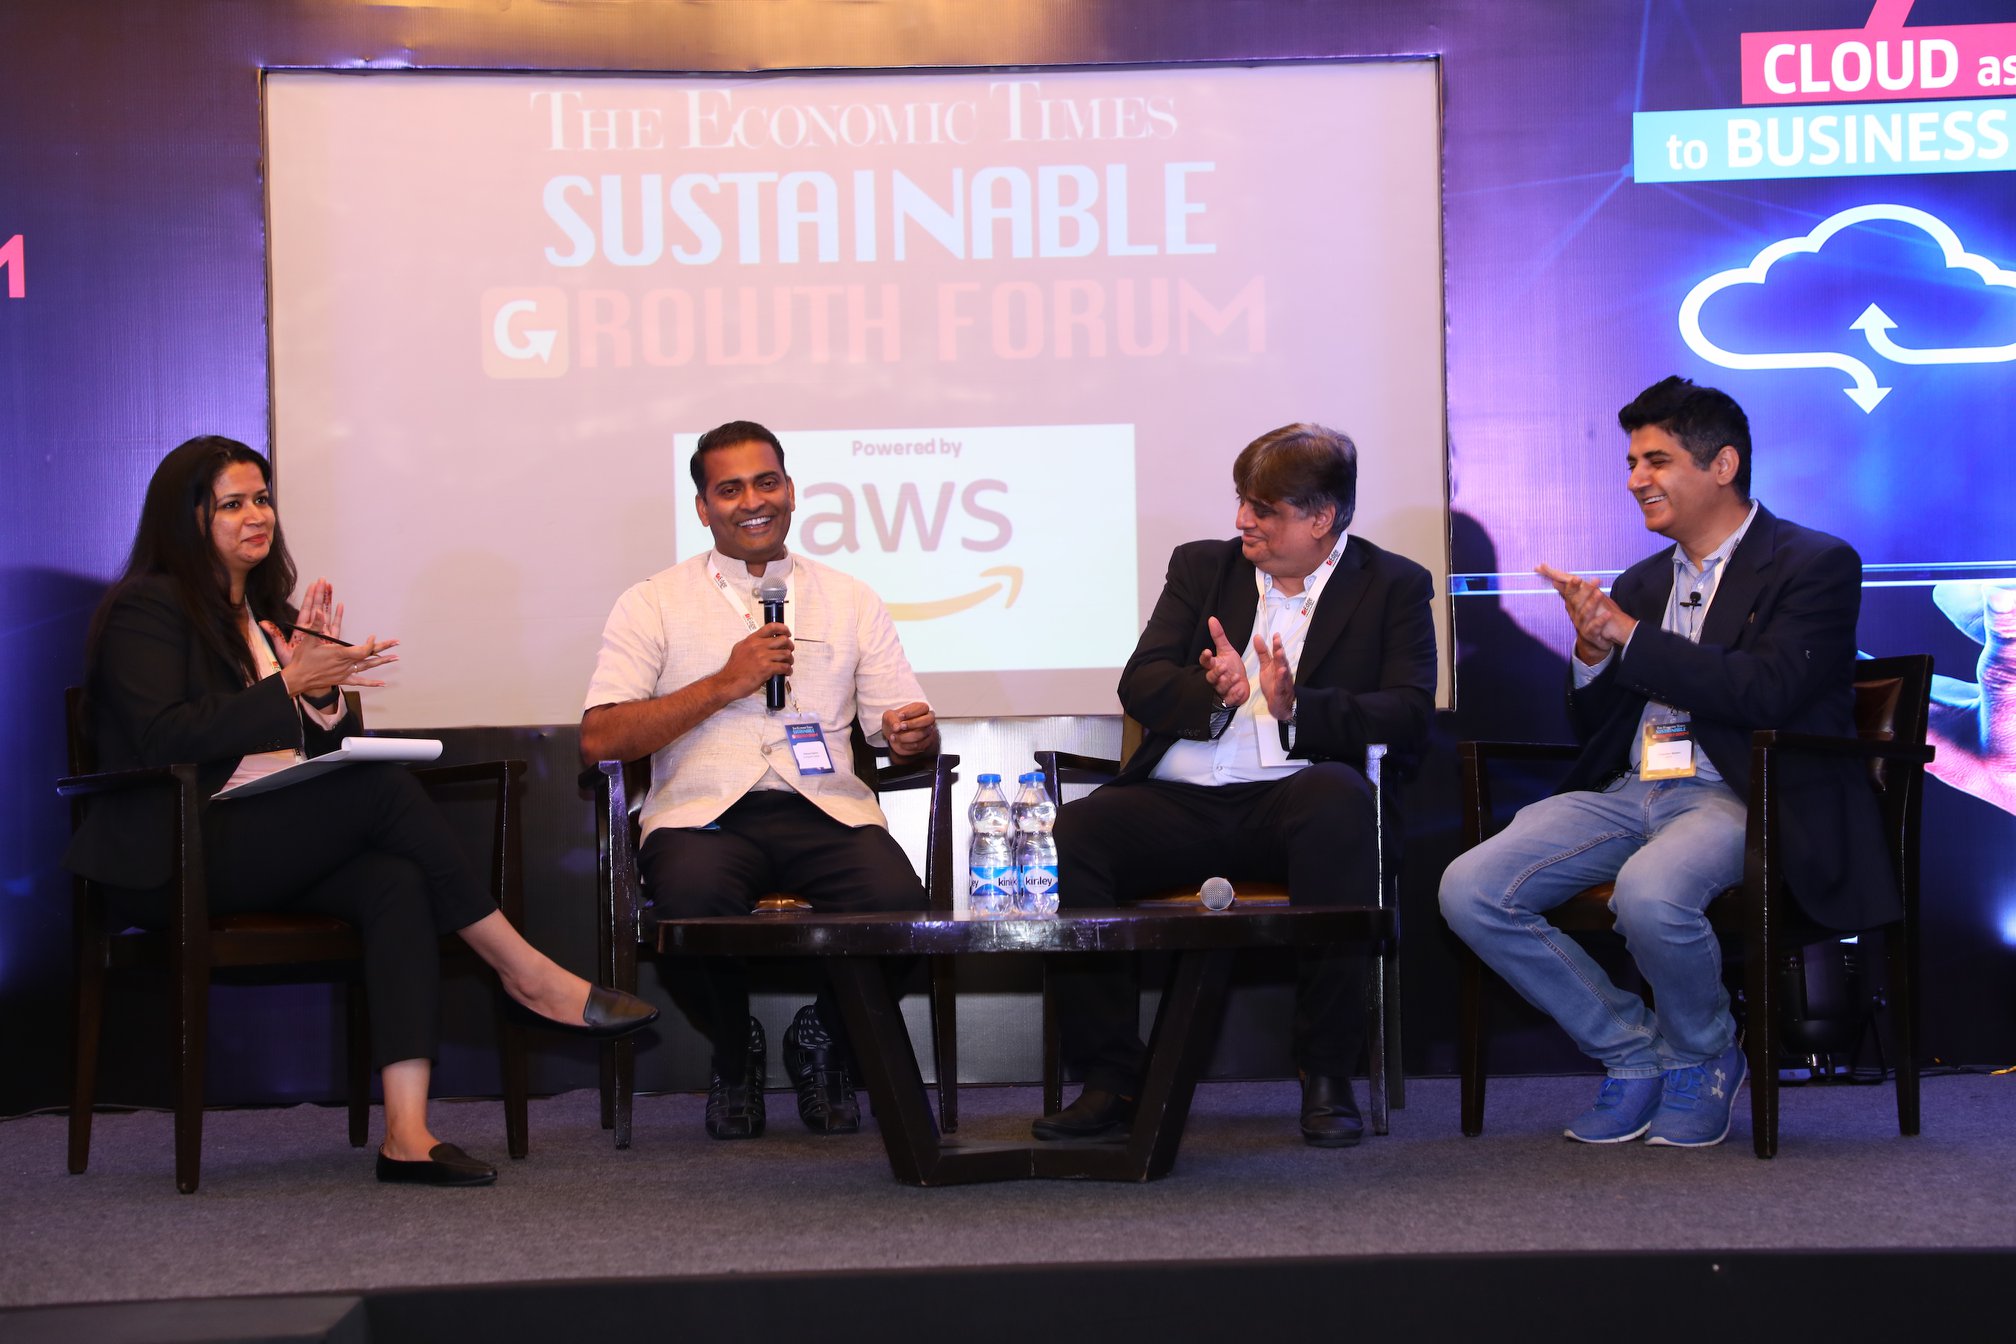 The Economic Times Sustainable Growth Forum